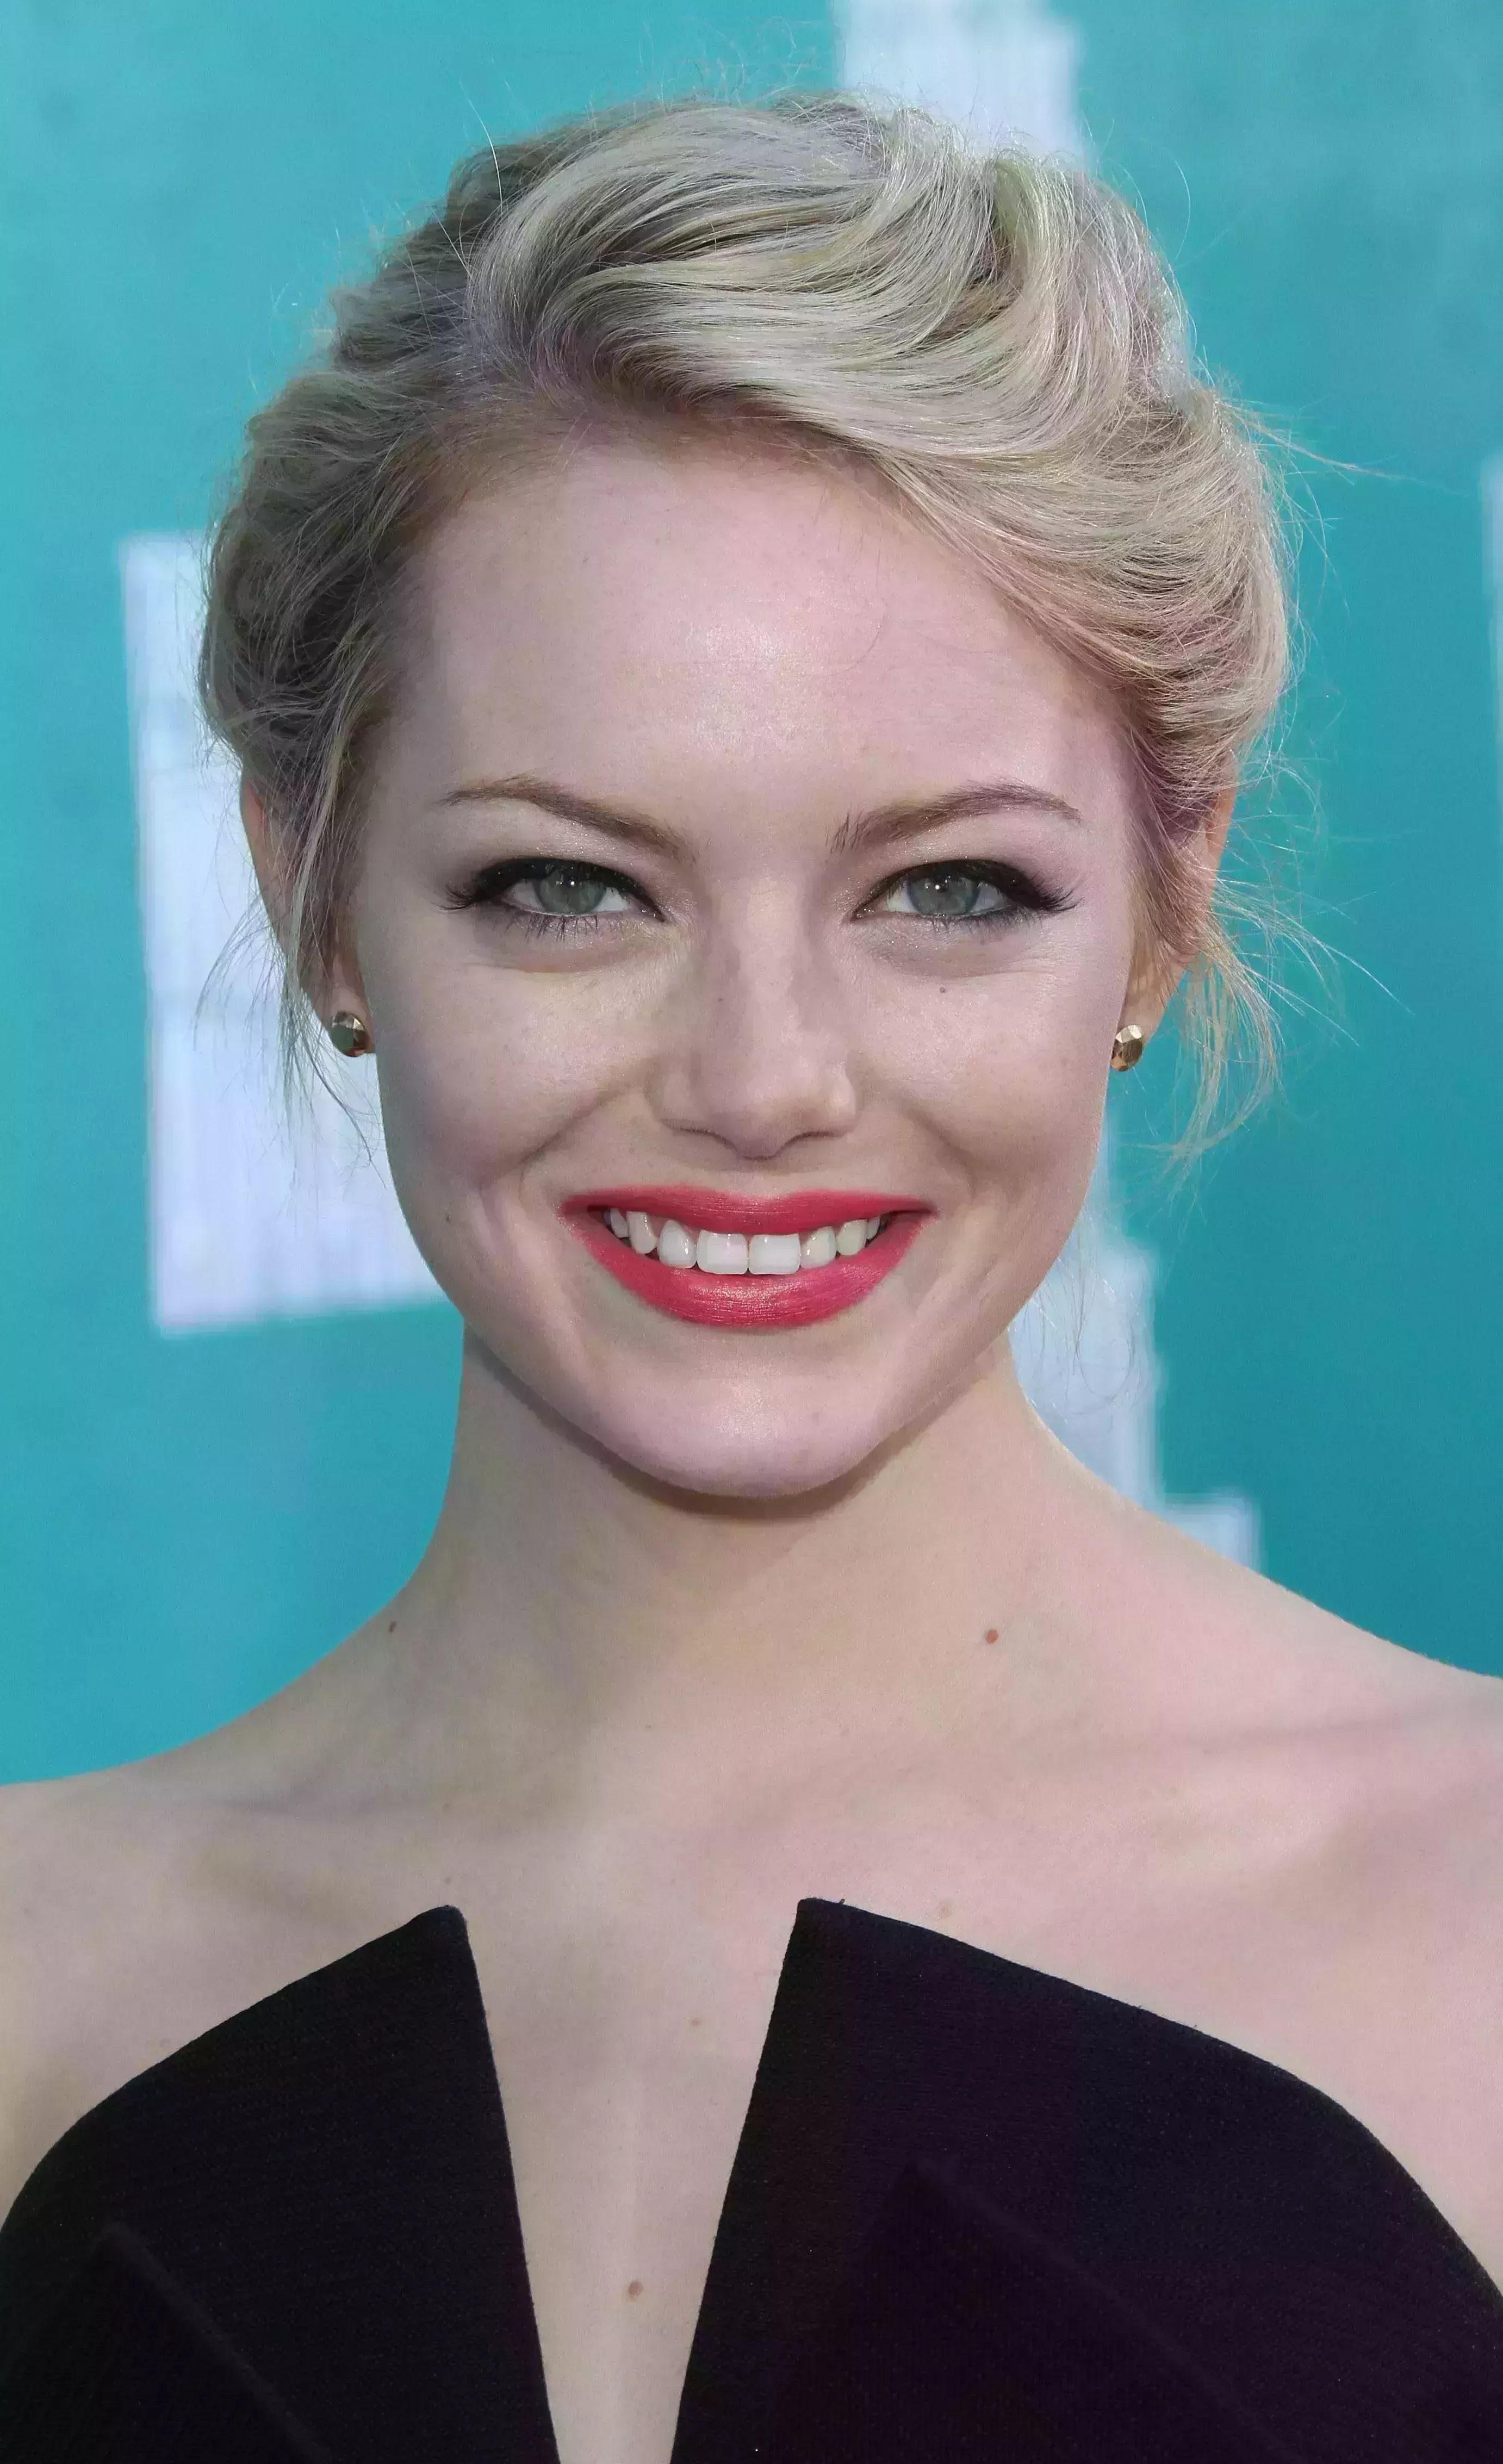 Emma Stone with That Frosty Side Part